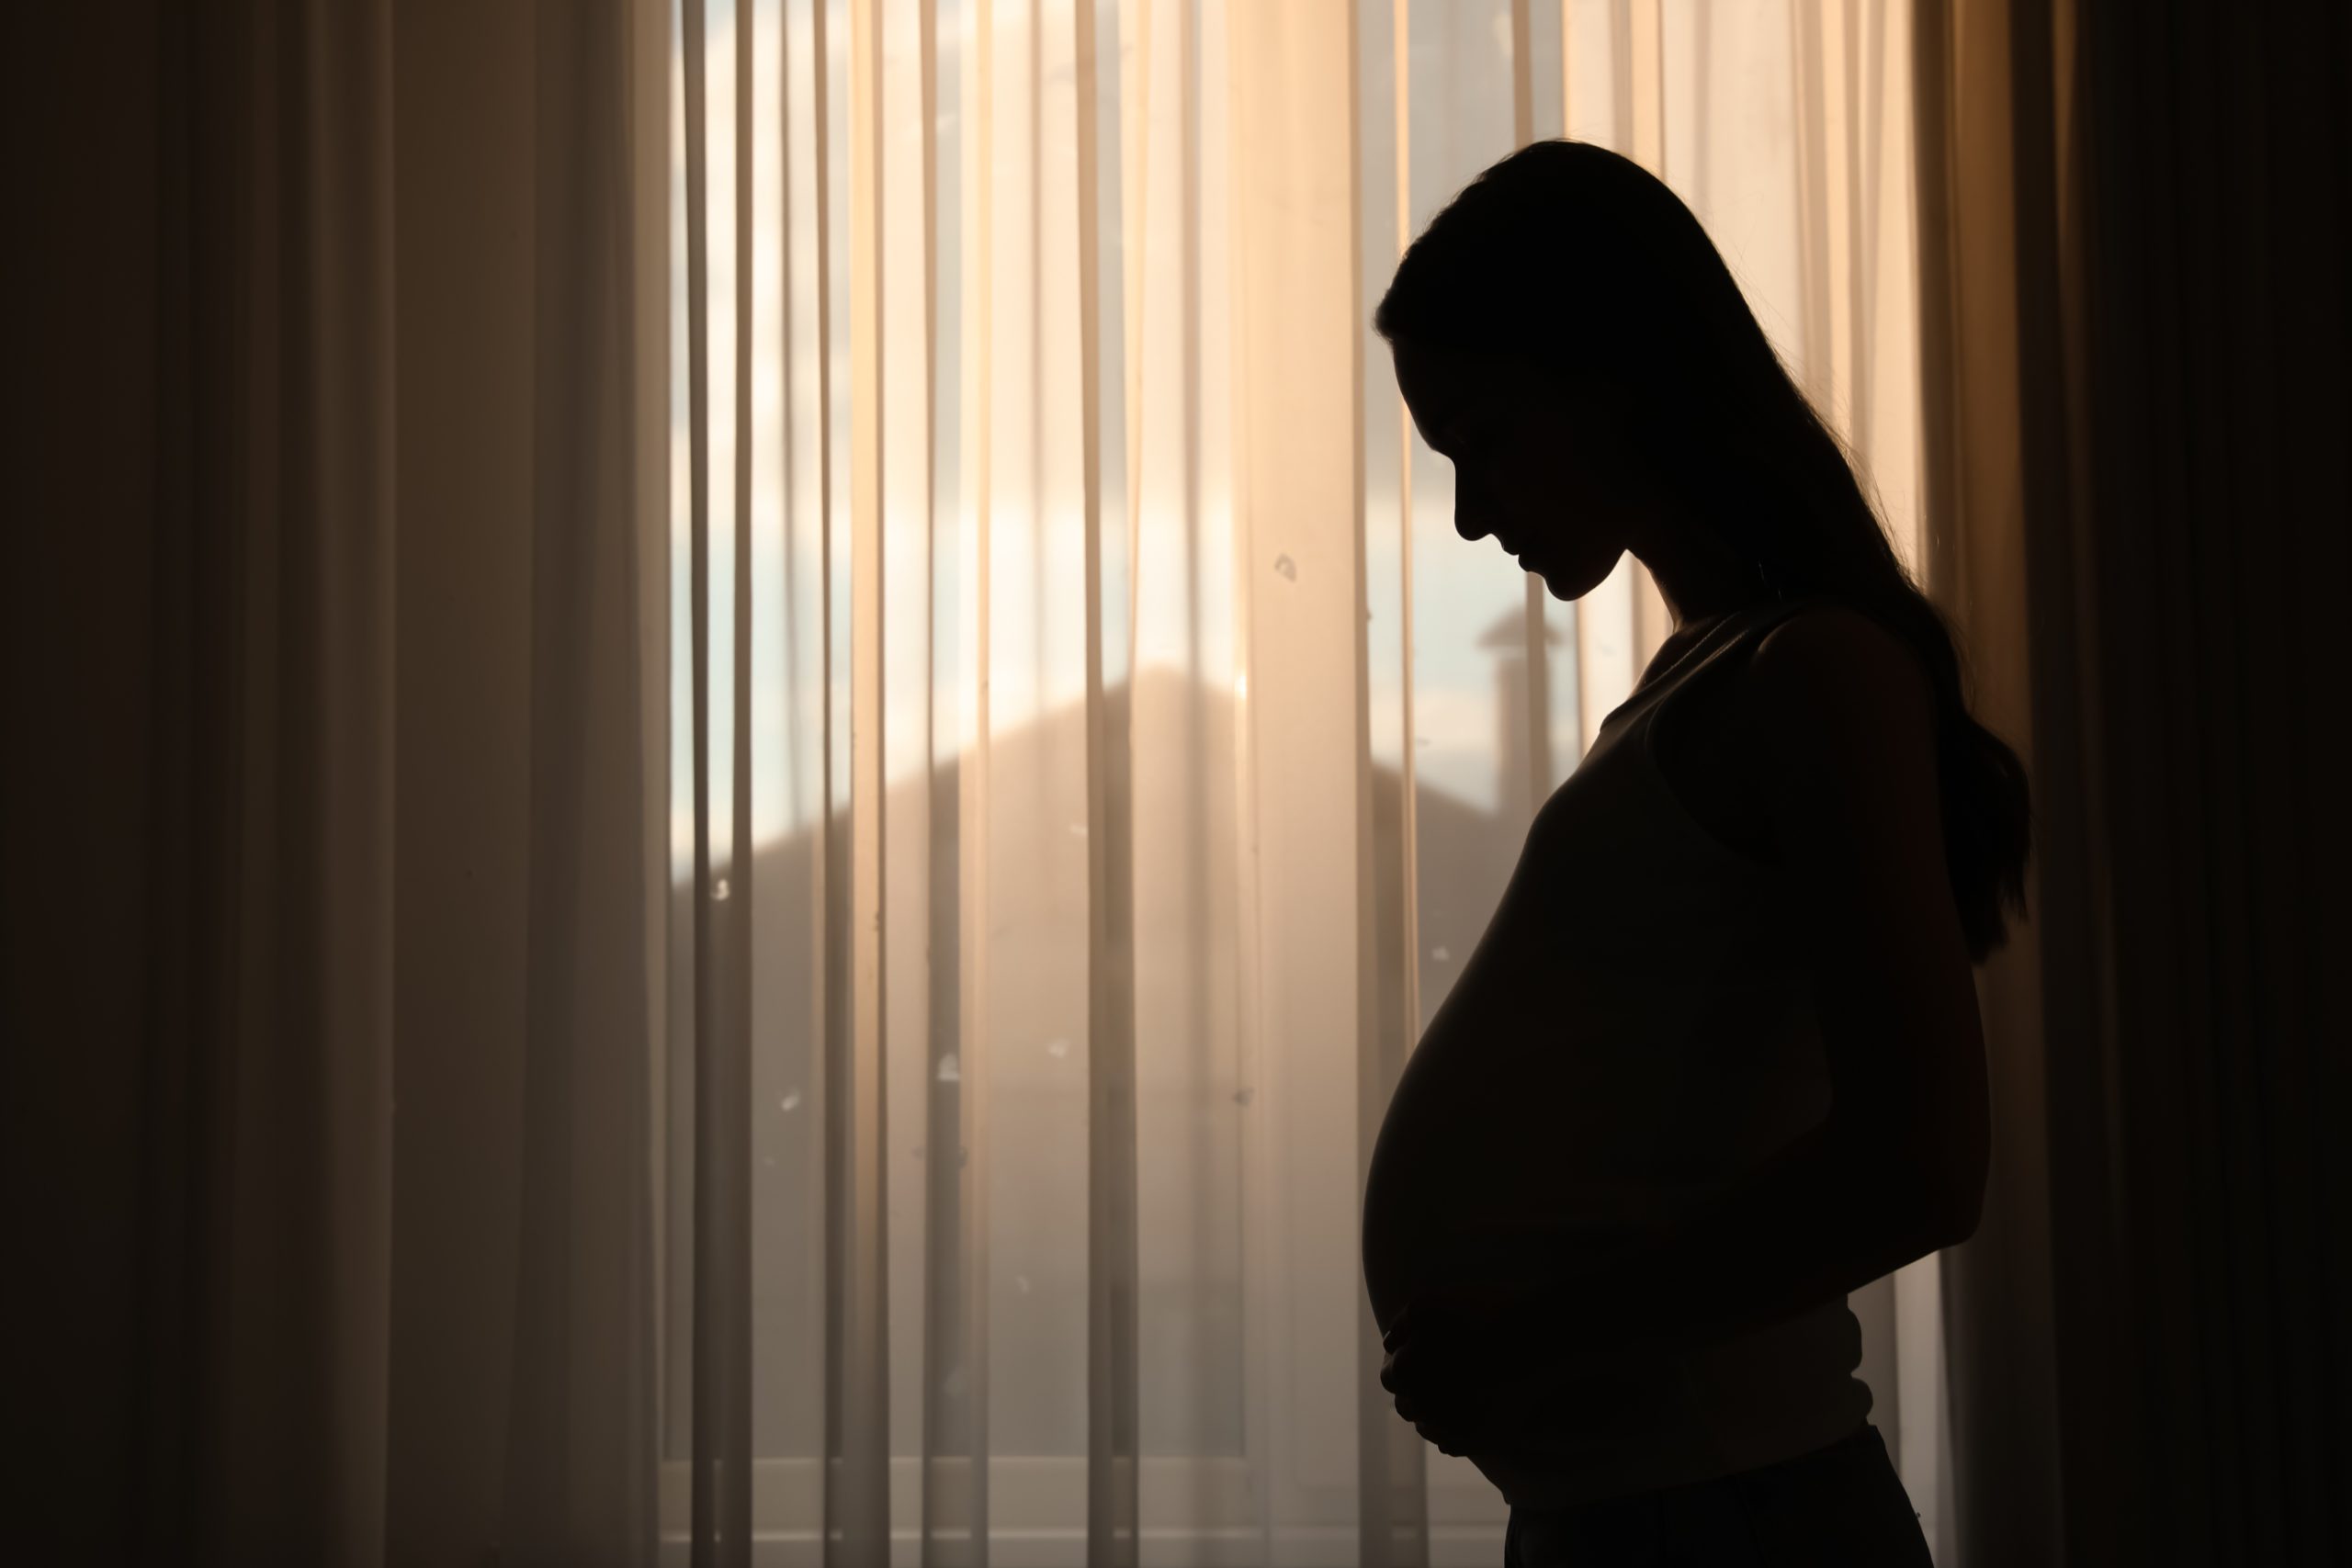 The rise in domestic abuse cases against pregnant women: What can victims do to protect themselves and their unborn child?